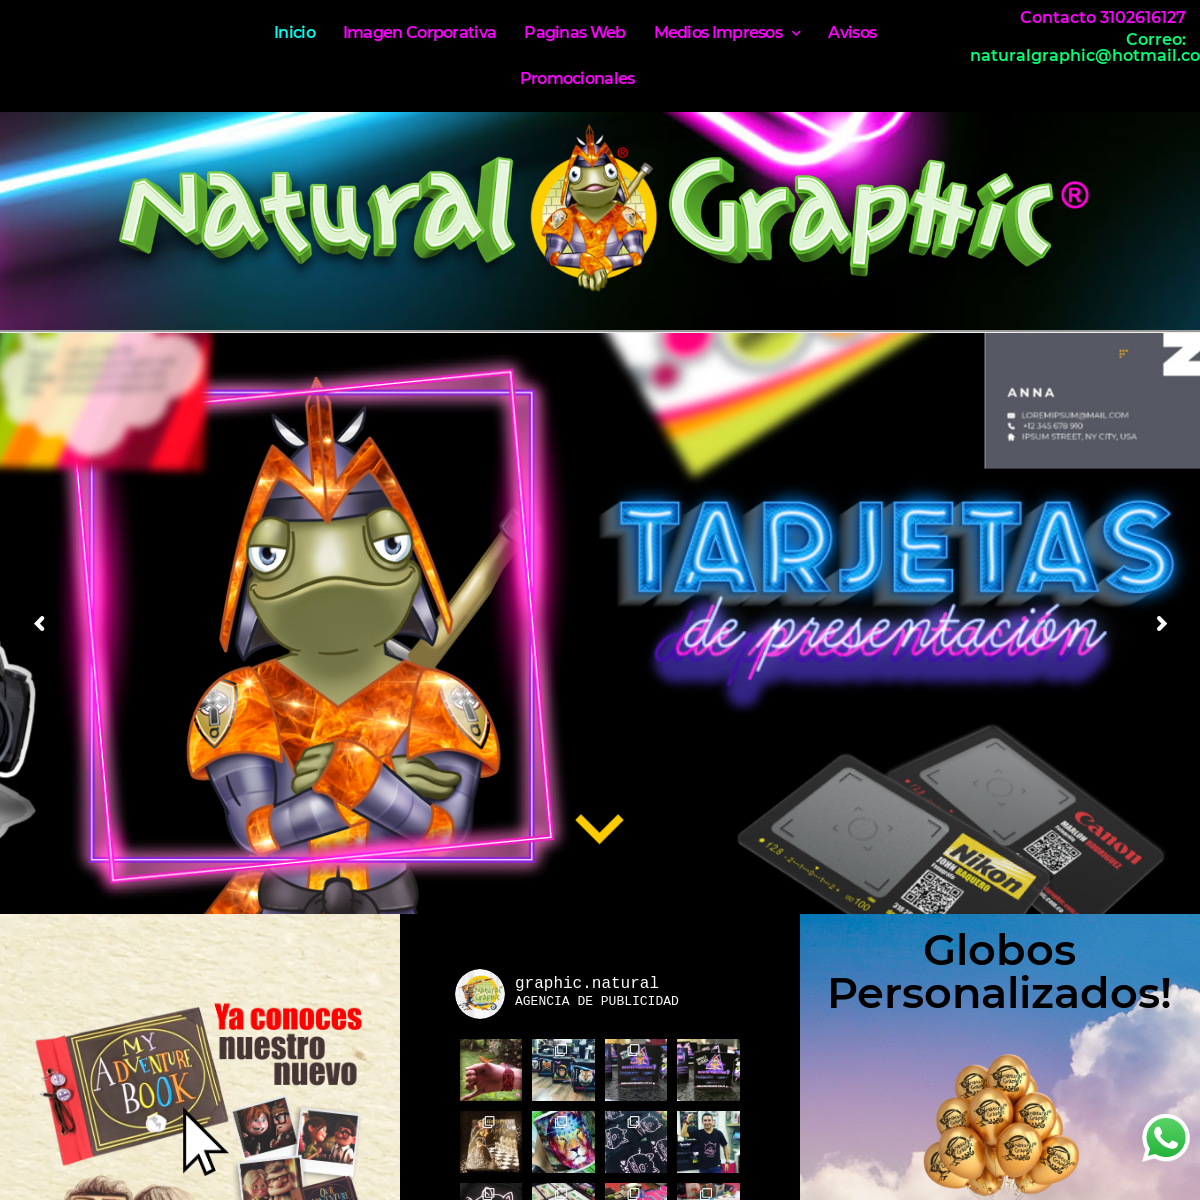 A complete backup of naturalgraphic.com.co